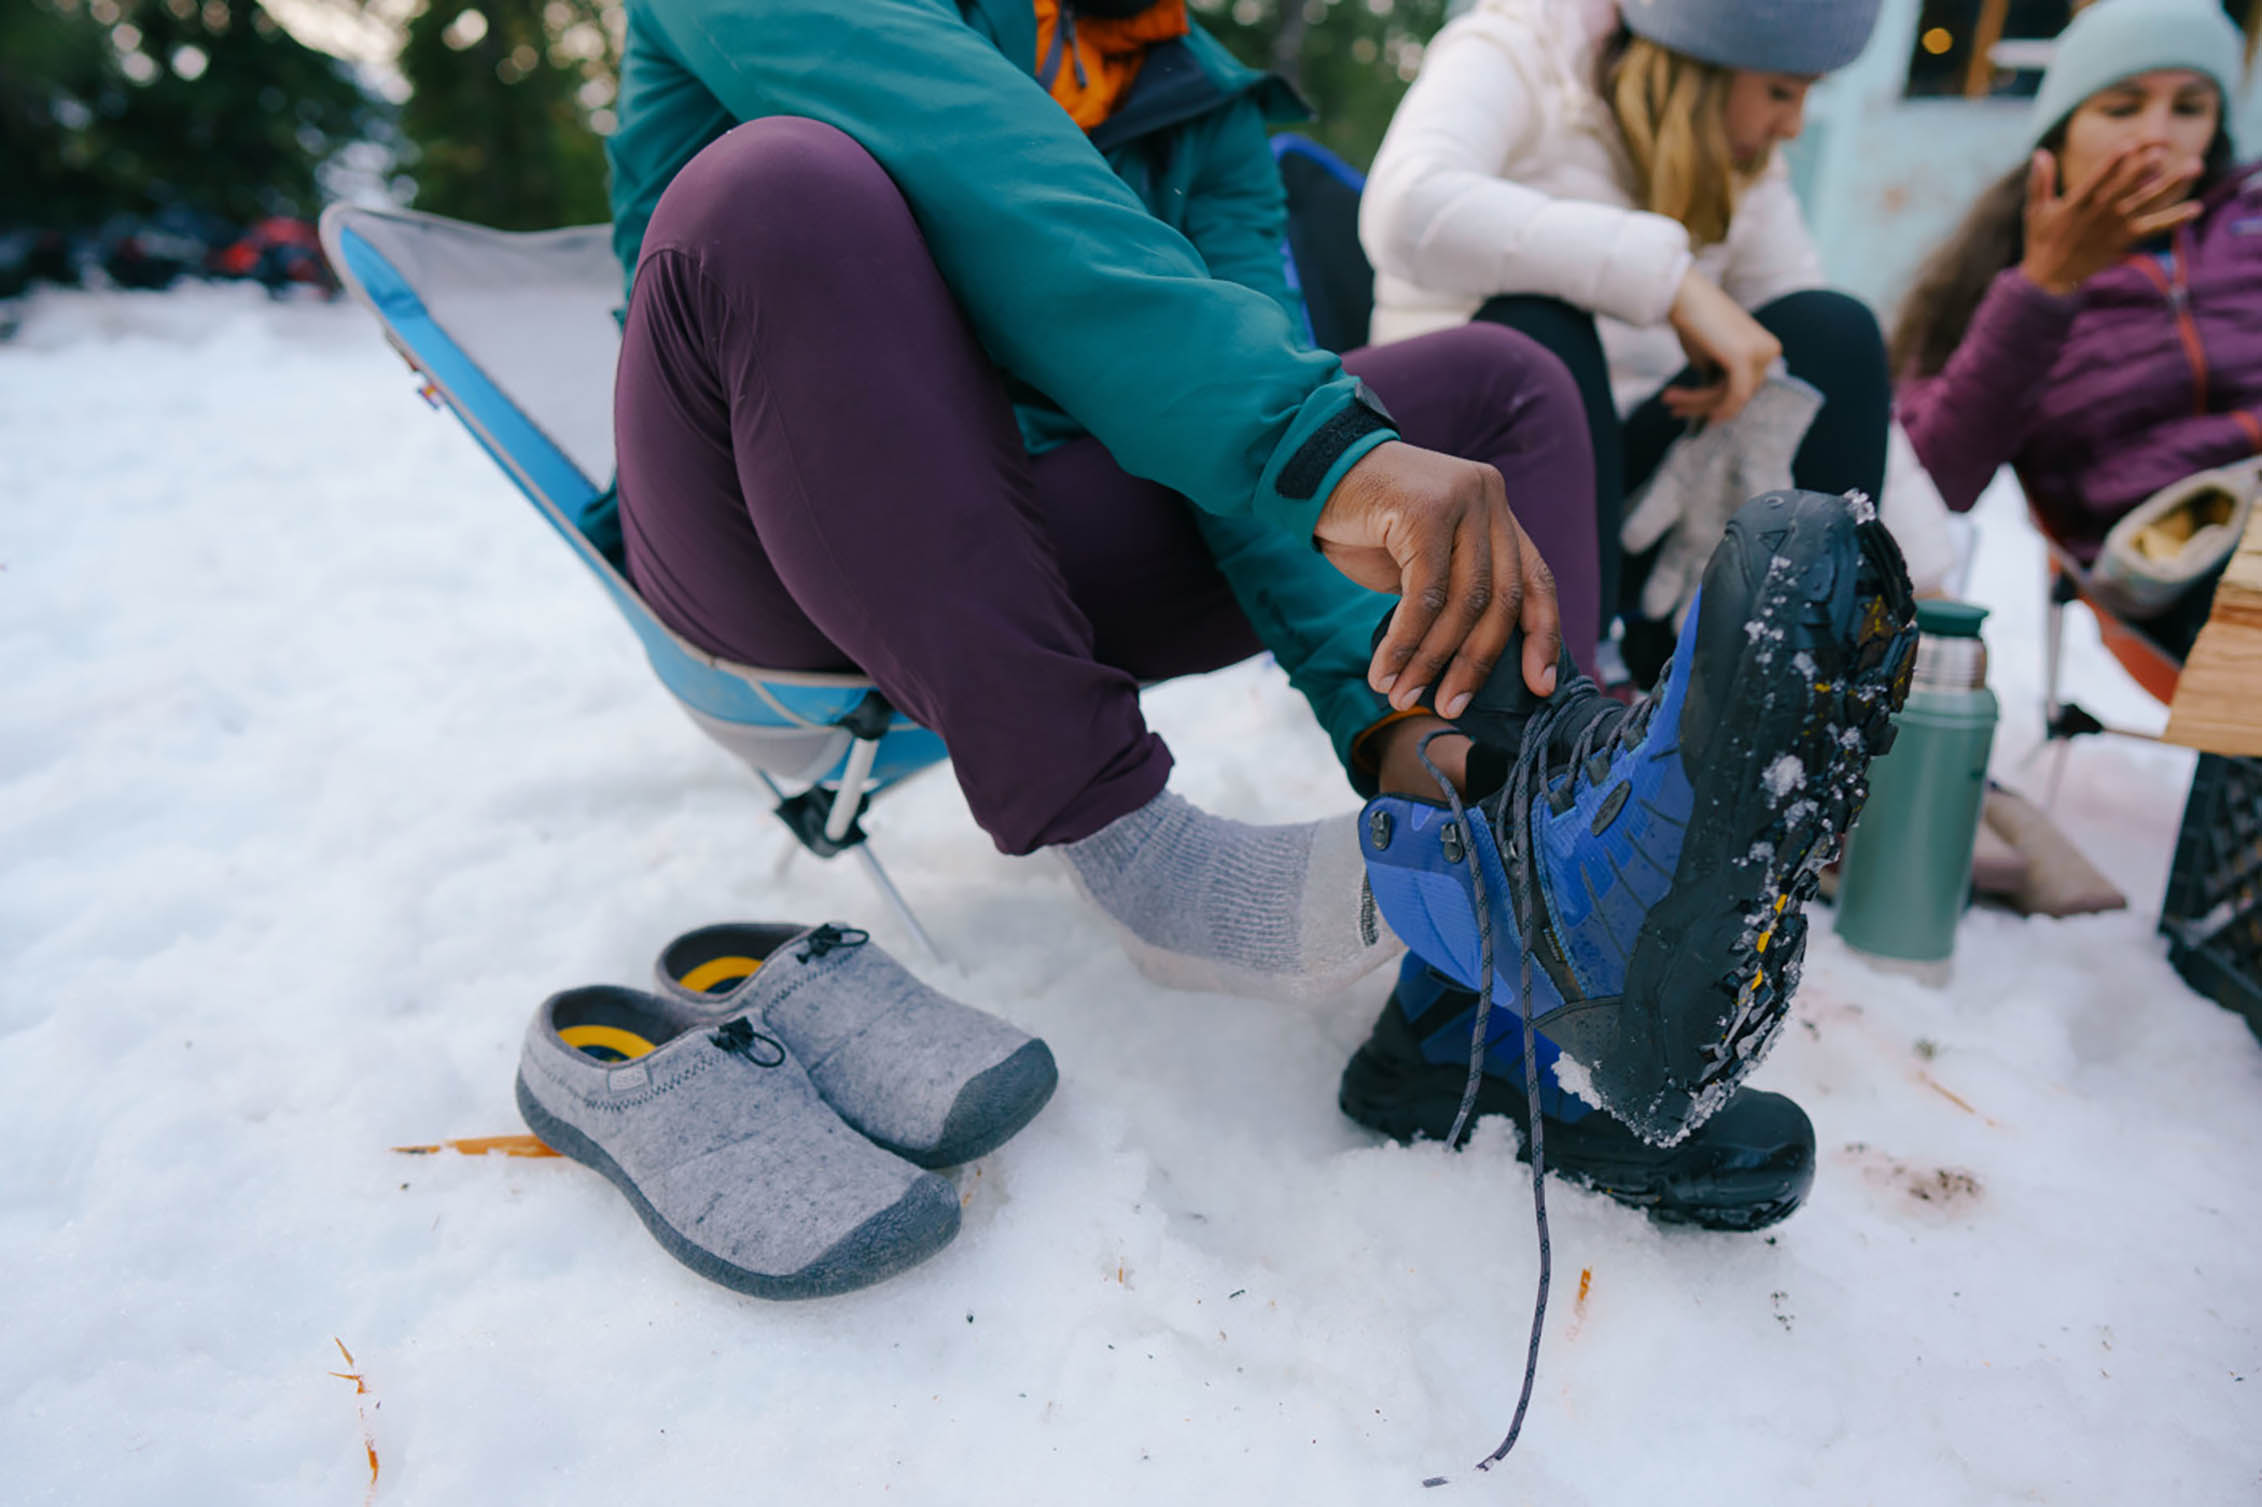 KEEN-parison: Which Cozy Slip-Ons for Winter Days? | KEEN Footwear